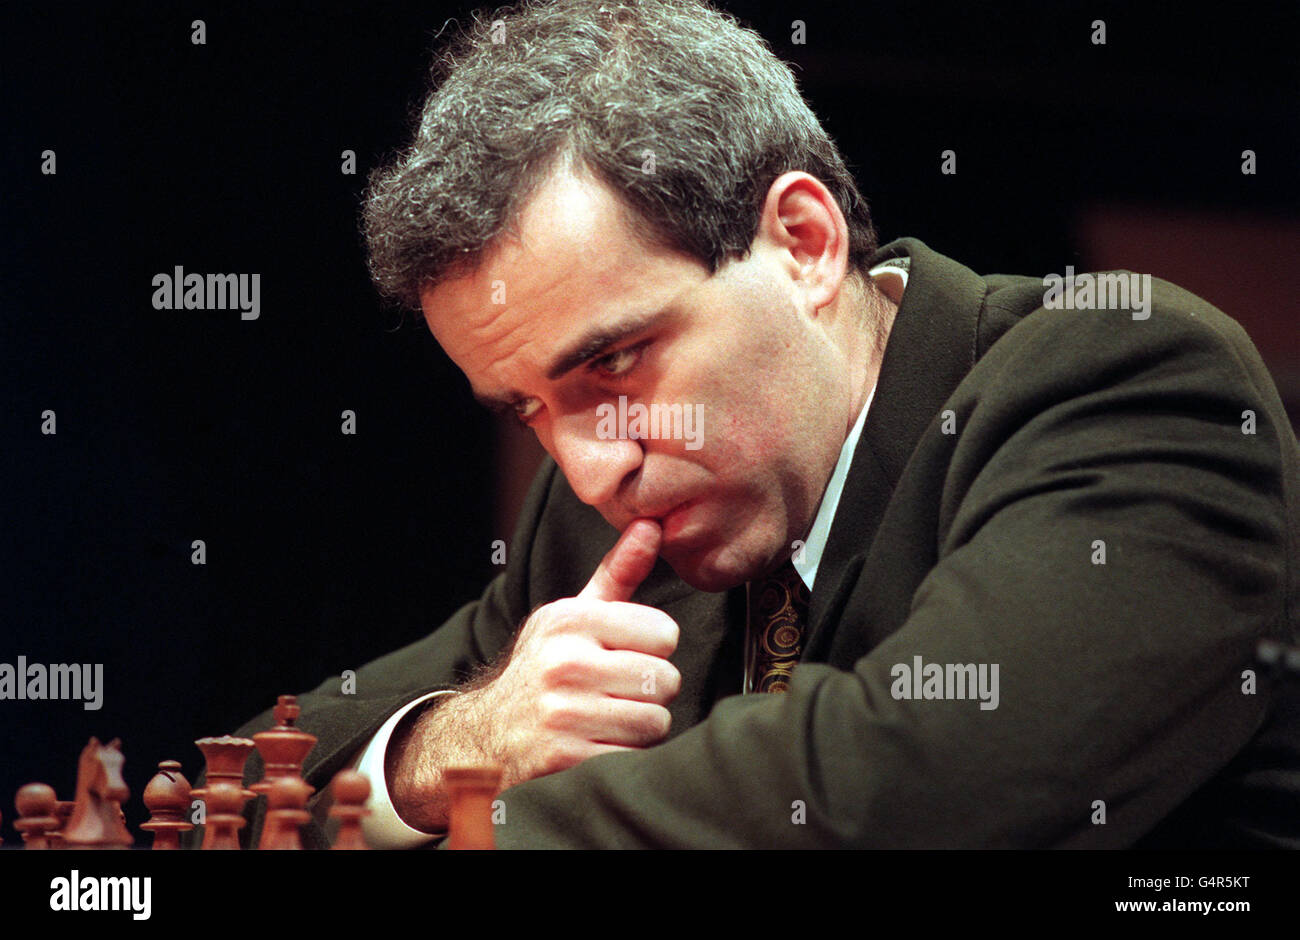 World Chess champion Gary Kasparov contemplates his next move against the Pentium procecessor based PC with Fritz4 software, in the deciding match of Man v Machine, in London. The machine beat Kasparov in 1994, but he went on to avenge his defeat in May 1995. Stock Photo